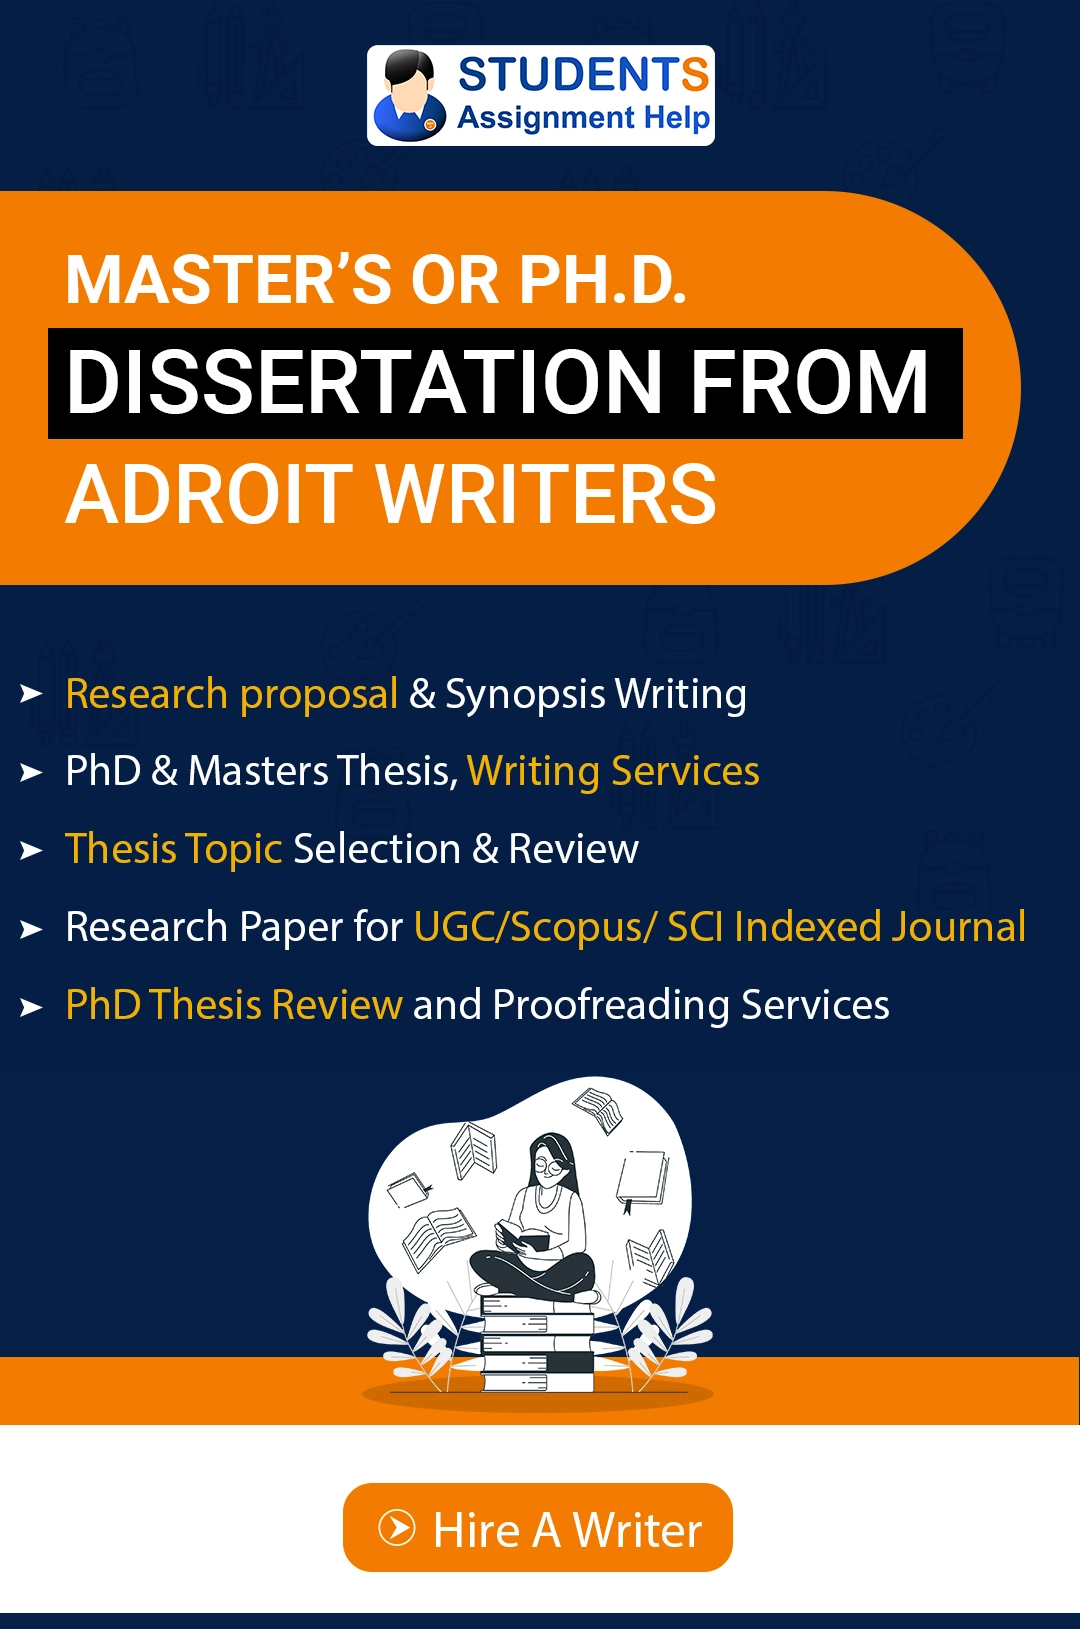 Need More Inspiration With dissertation service? Read this!